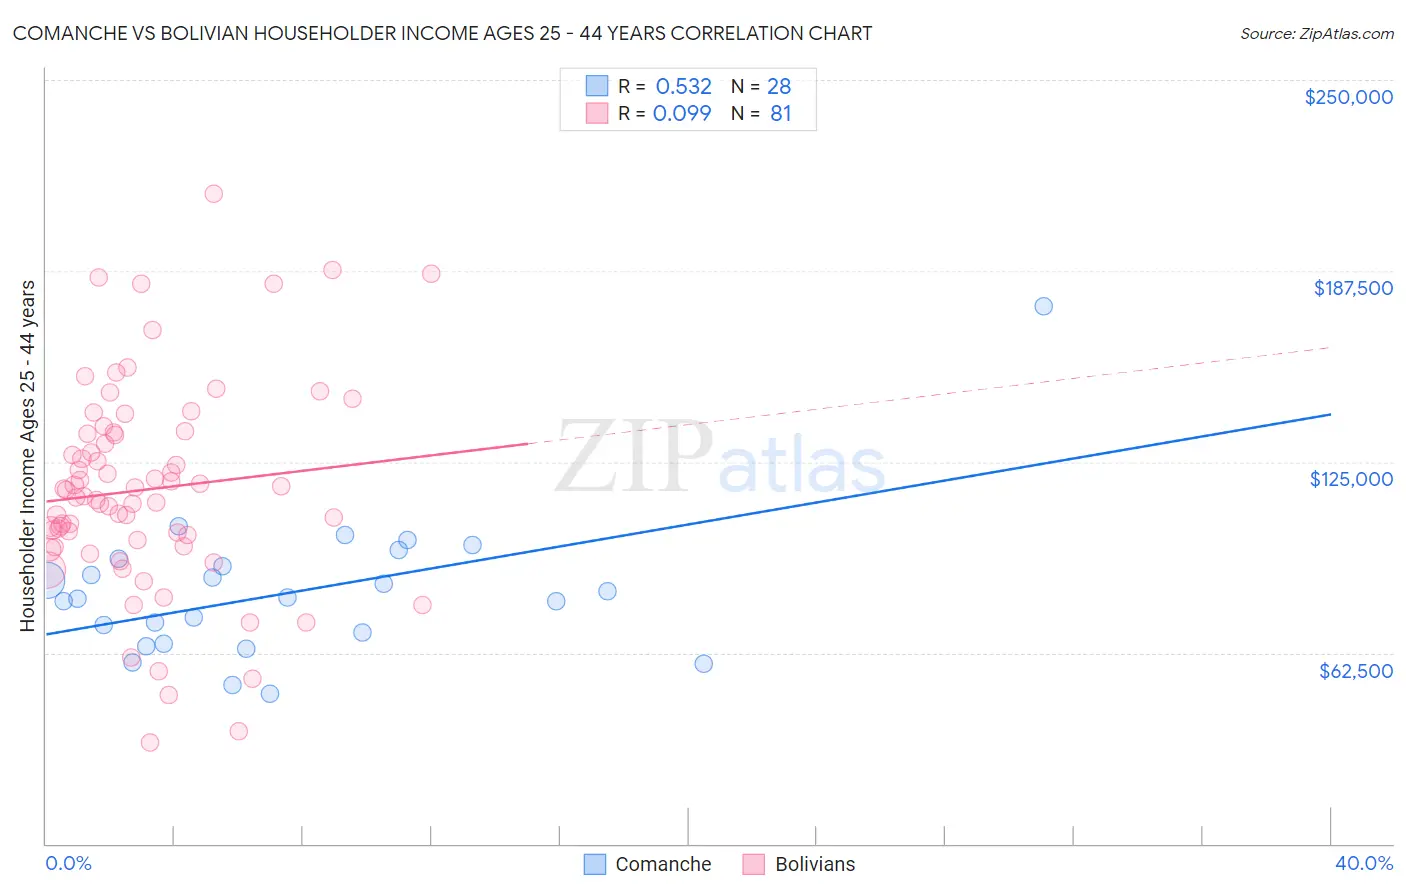 Comanche vs Bolivian Householder Income Ages 25 - 44 years